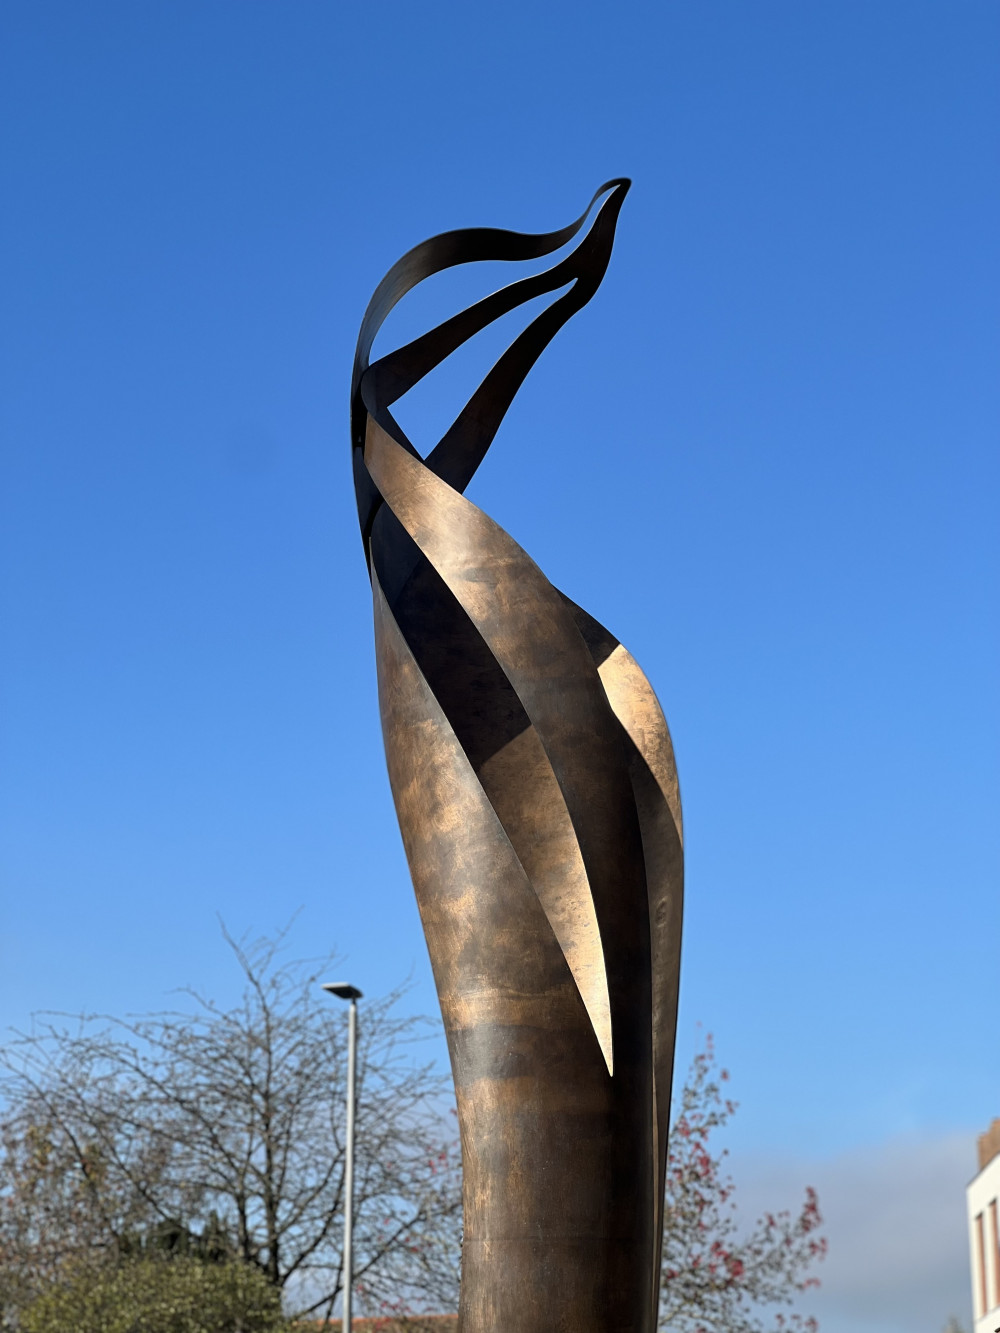 Seven jobs available in and around Letchworth right now brought to you in association with Crossroads Care. PICTURE: One of the famous six foot beacon sculptures in Letchworth town centre. CREDIT: Nub News  